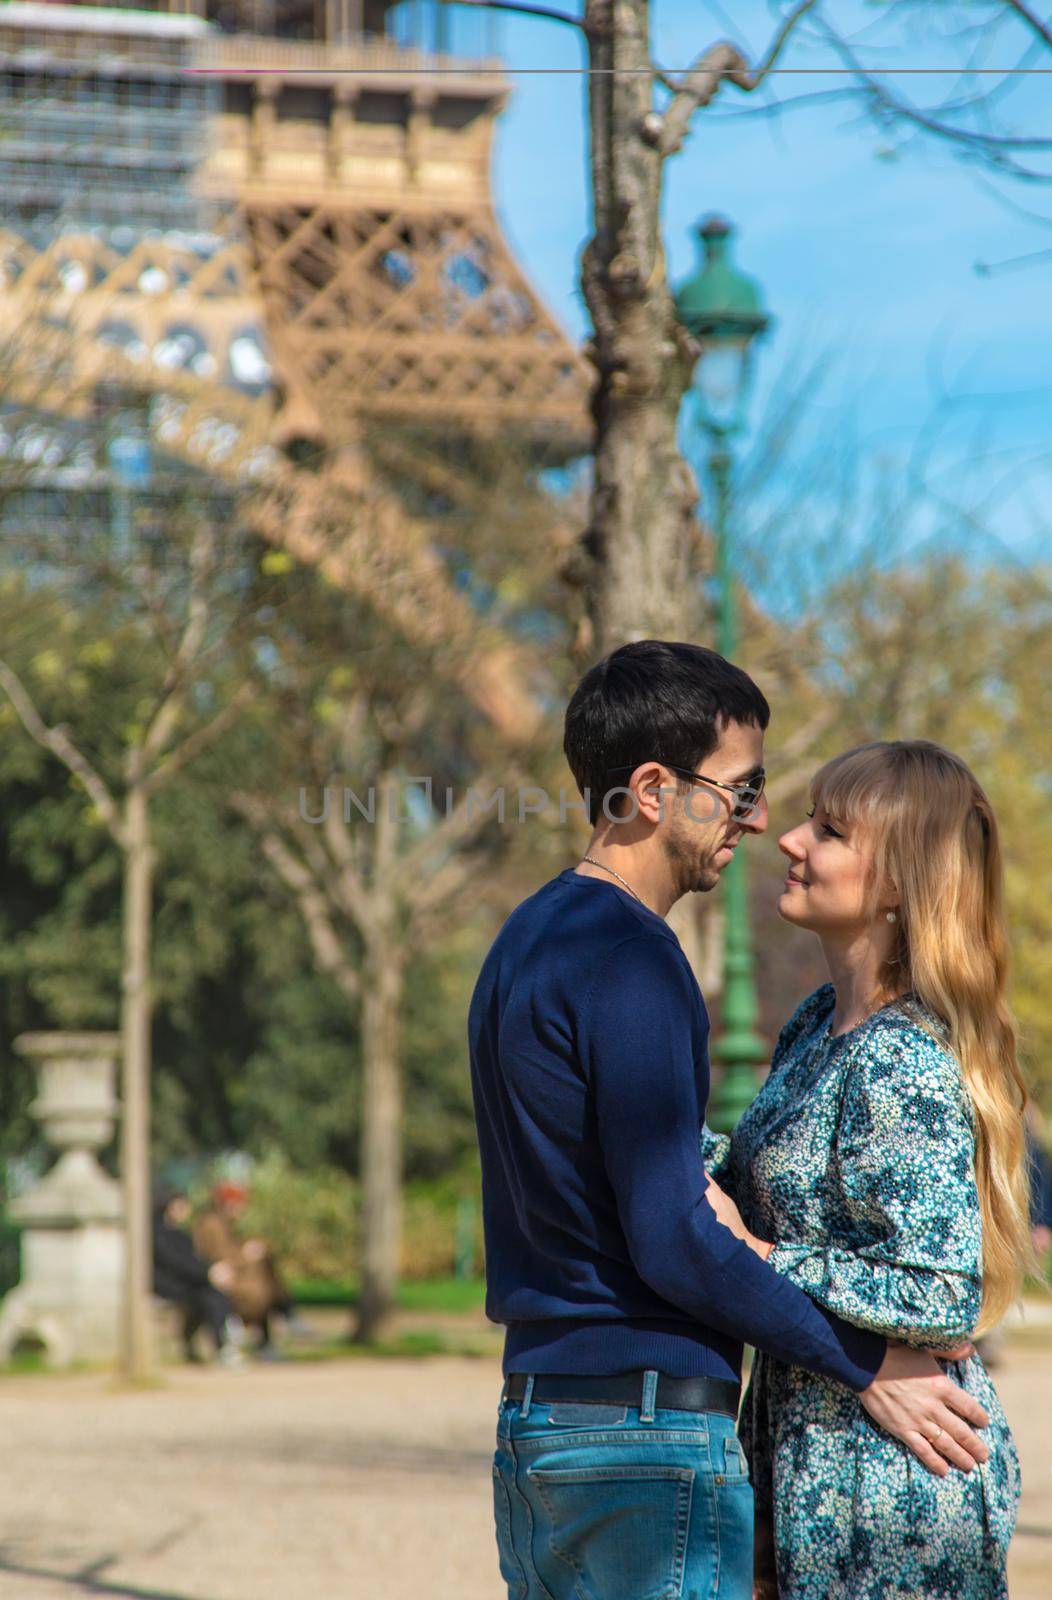 Couple man and woman near the eiffel tower. Selective focus. People.